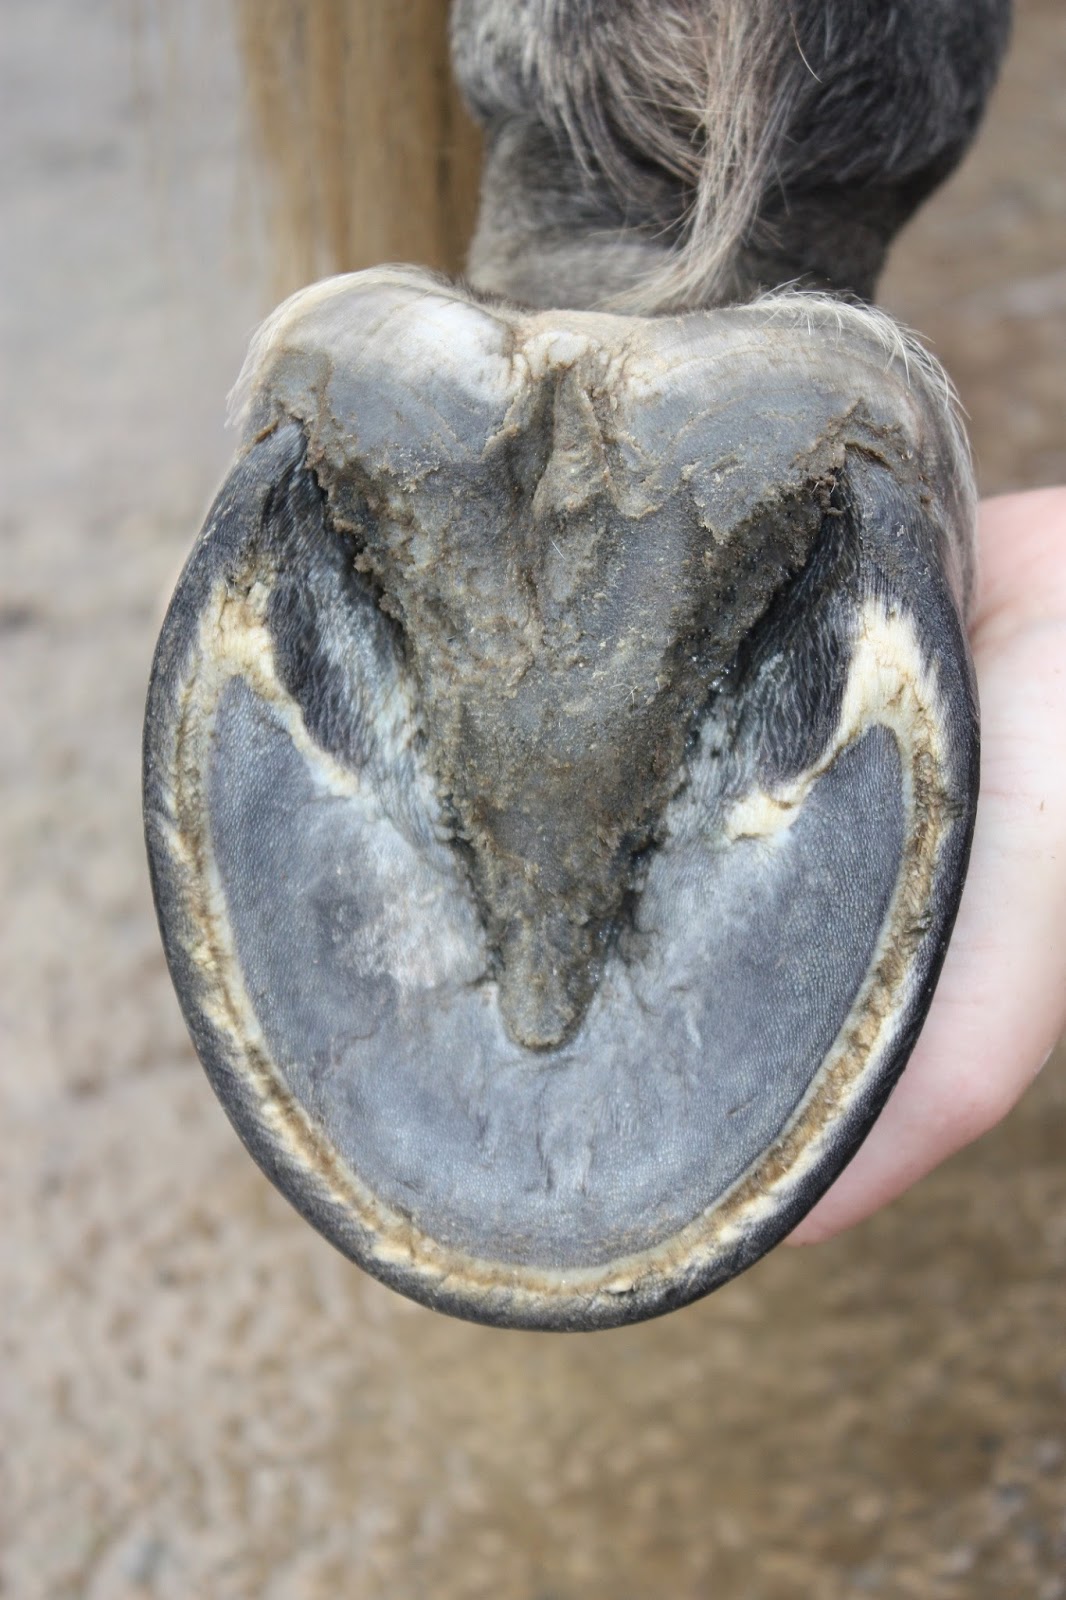 Key Tips and Advice for Barefoot Hoof Care from The Saddlery Shop!